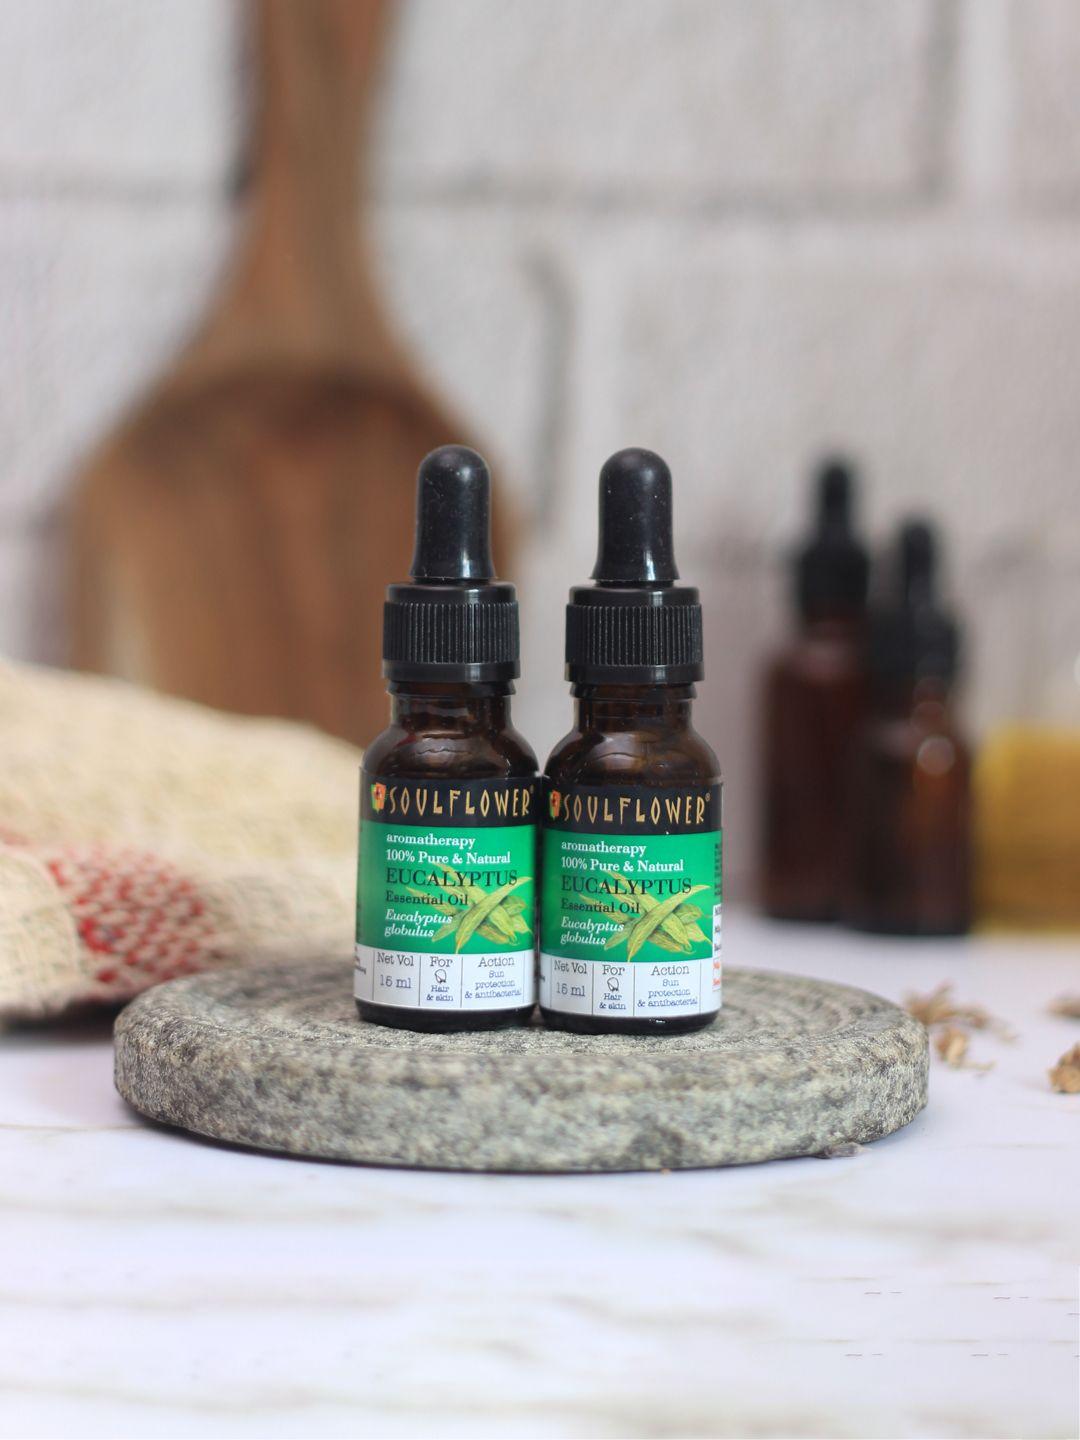 soulflower set of 2 aromatherapy 100% pure & natural eucalyptus essential oils - 15ml each